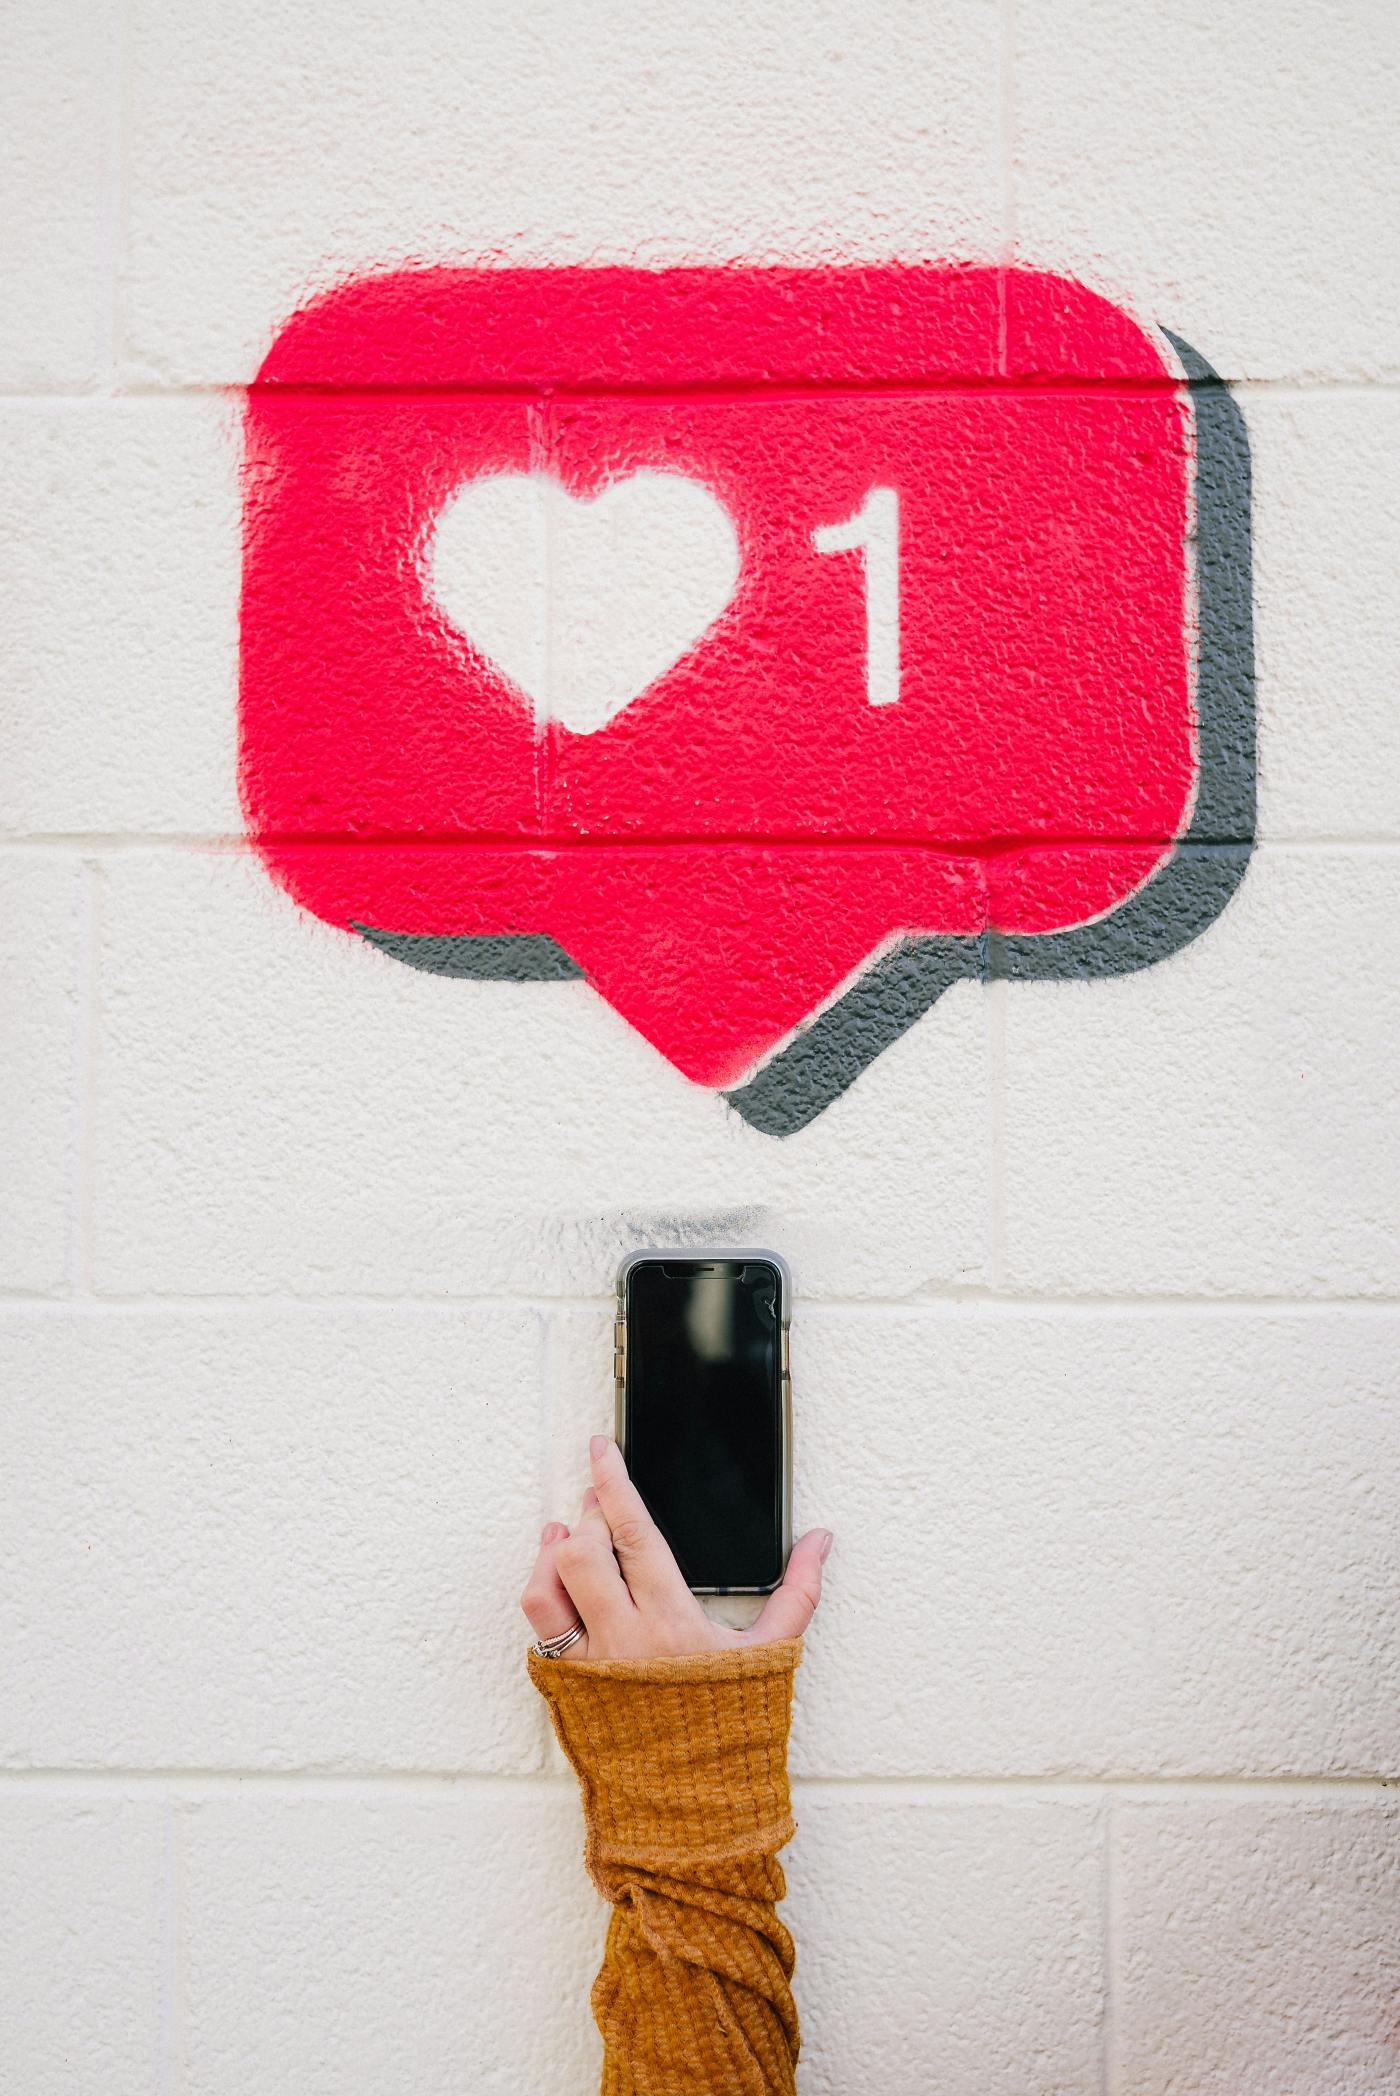 A wall with a heart and the number one painted on it, with a woman's hand holding a phone under it.